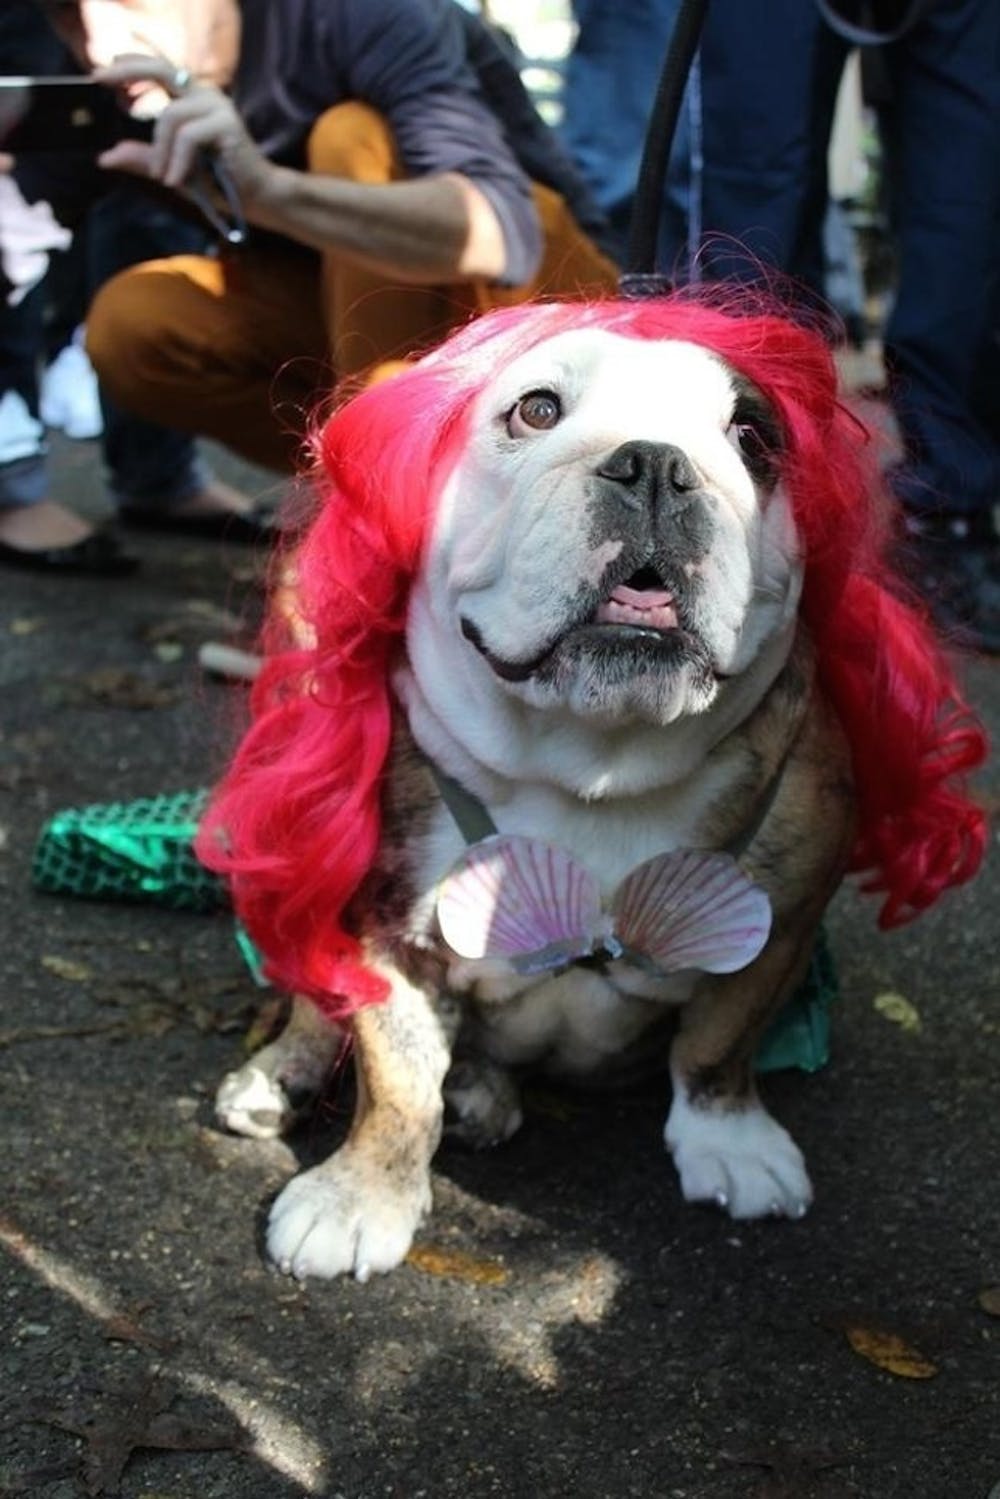 An English Bulldog in ariel costume while sitting on the pavement